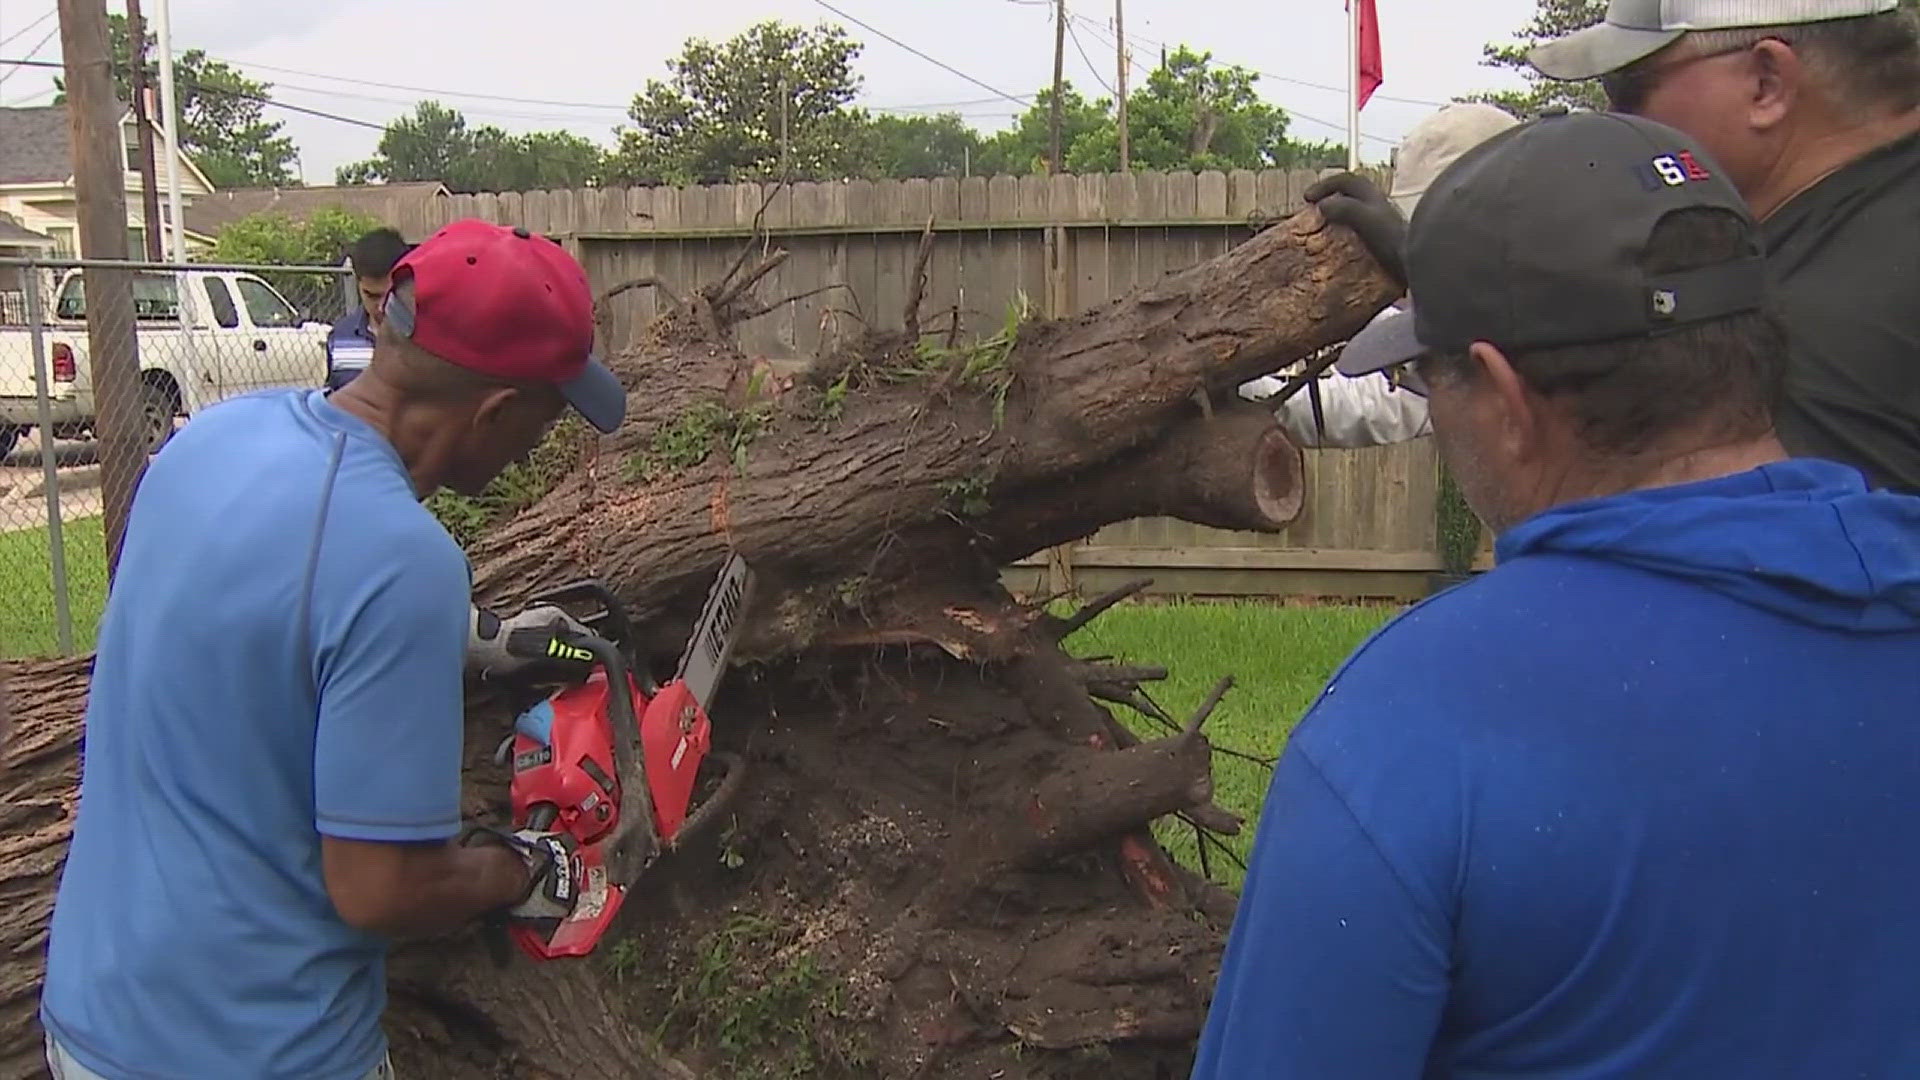 New Houston is joining forces with Mayor Whitmire and a host of skilled trade apprentices to help clean up damage from last week's destructive storms.